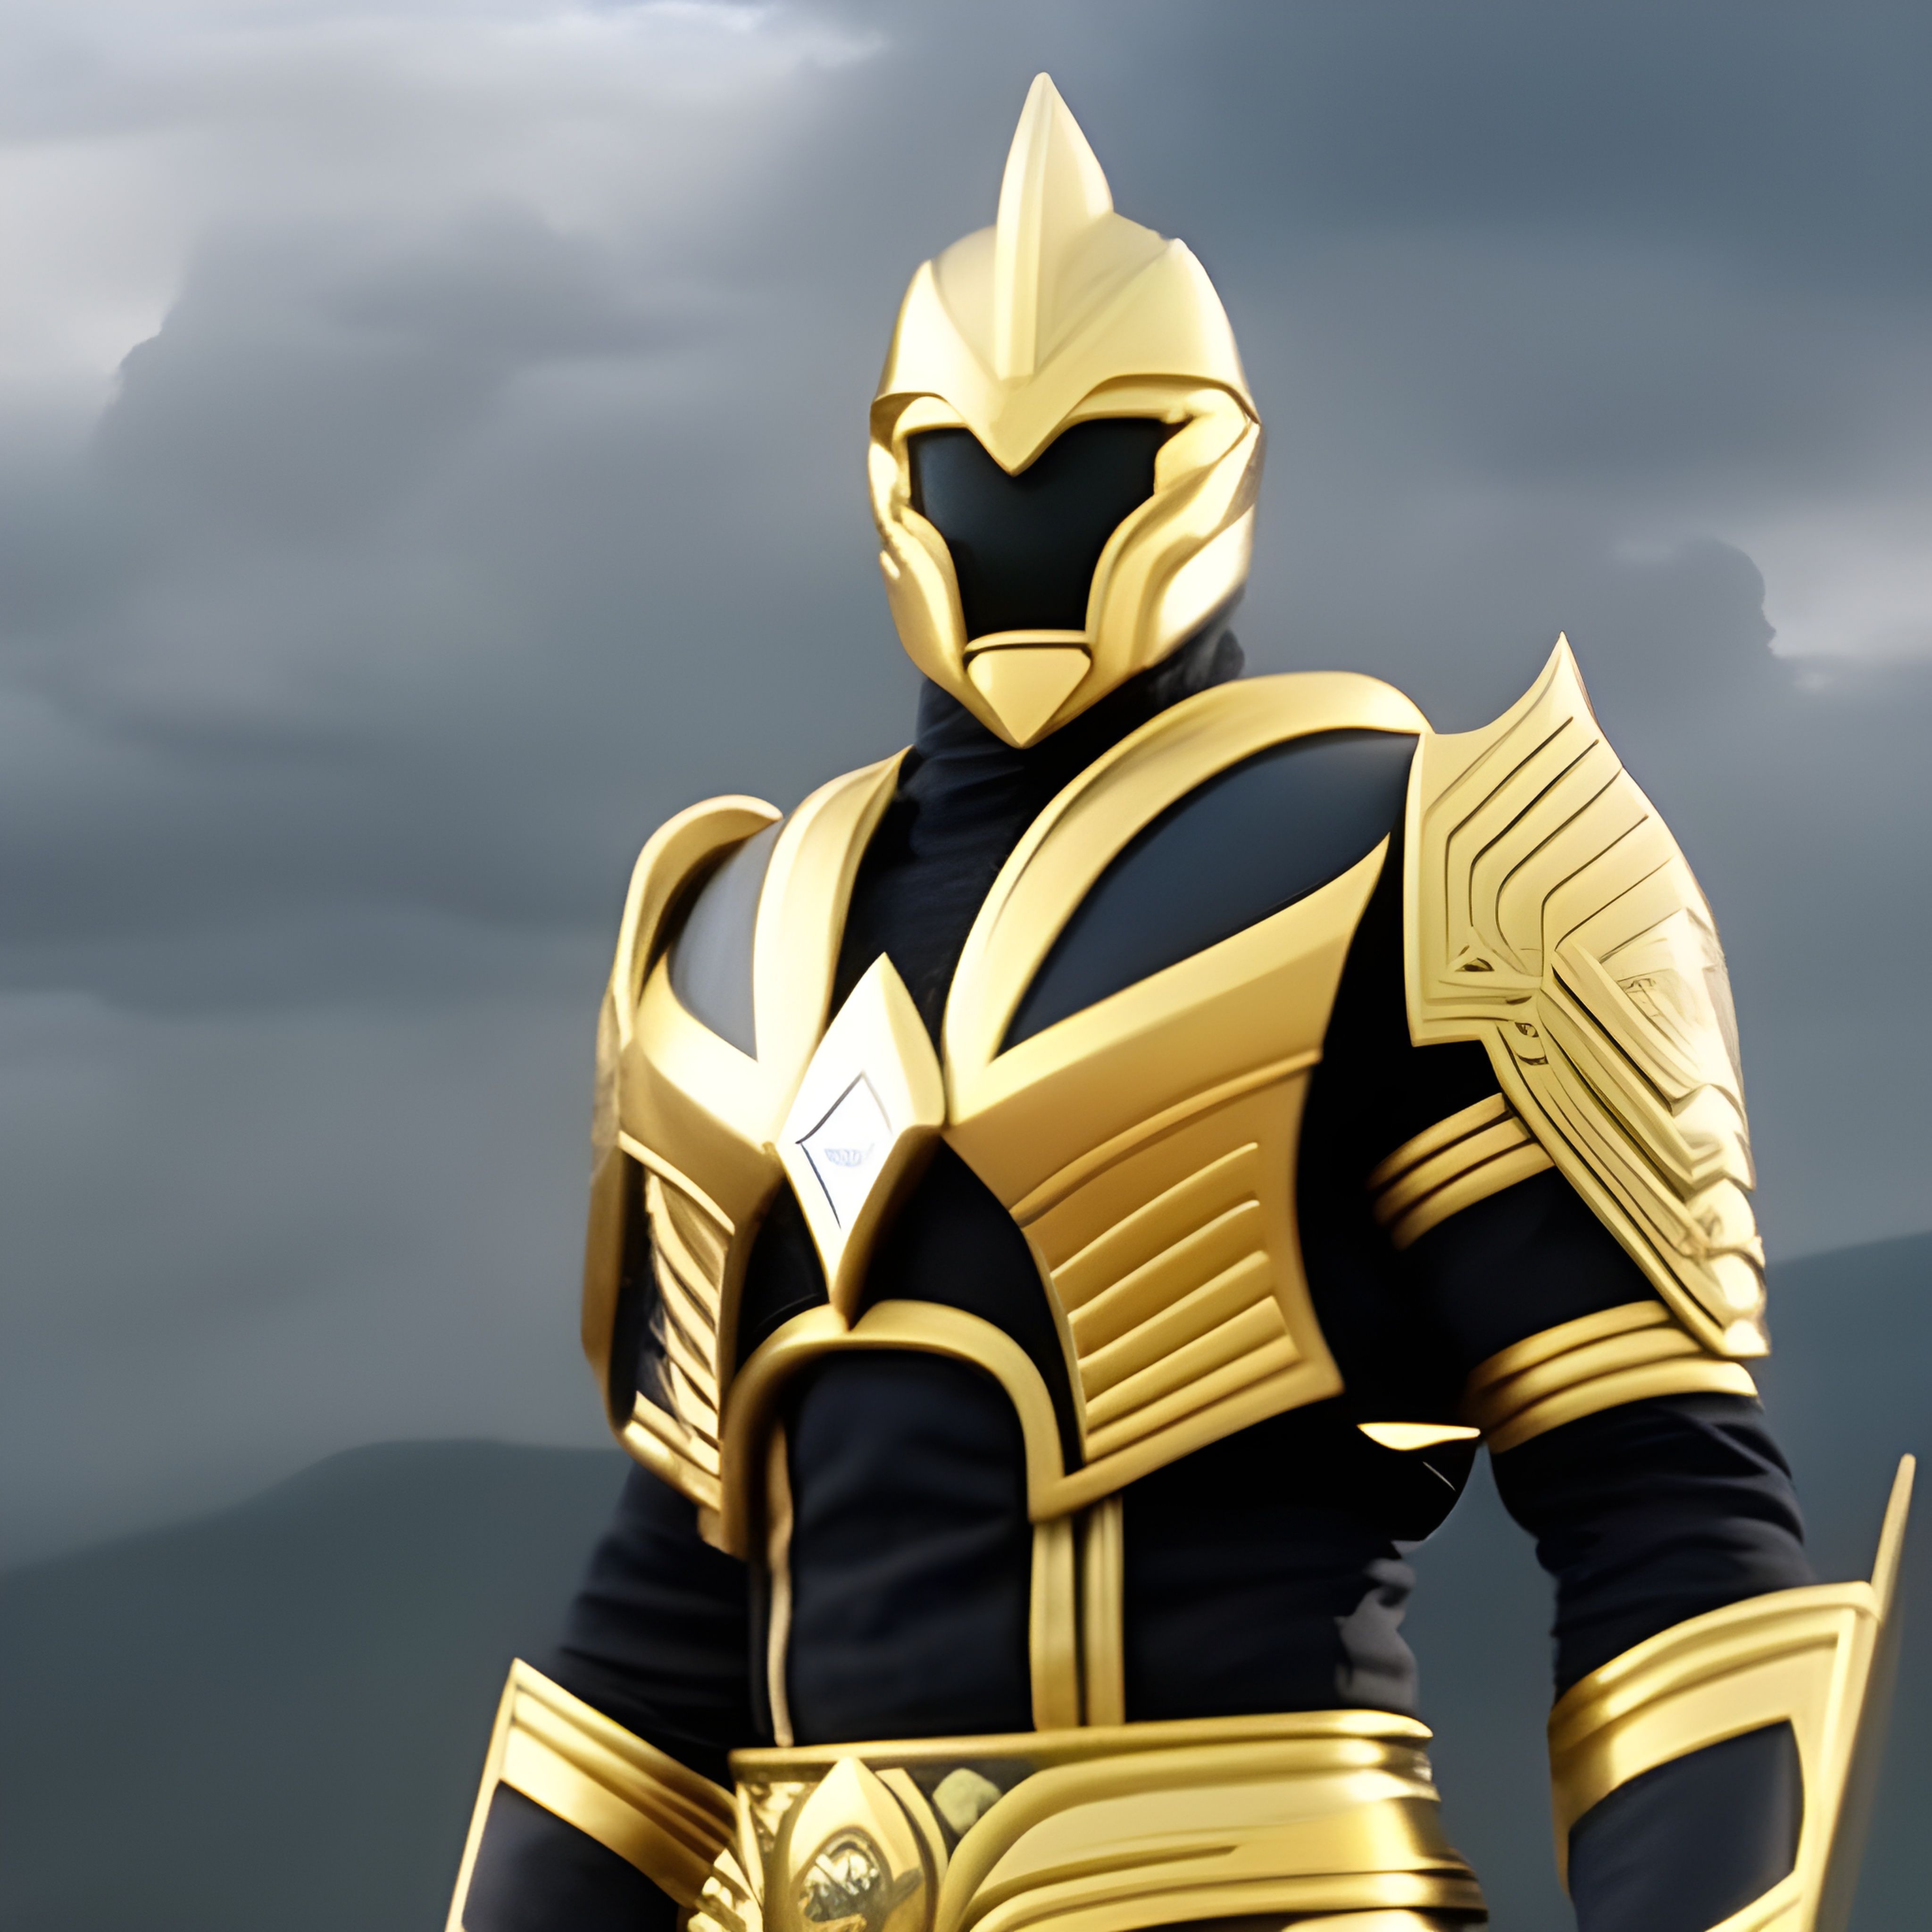 Power Rangers' first NFT lets you redeem for a darker-style